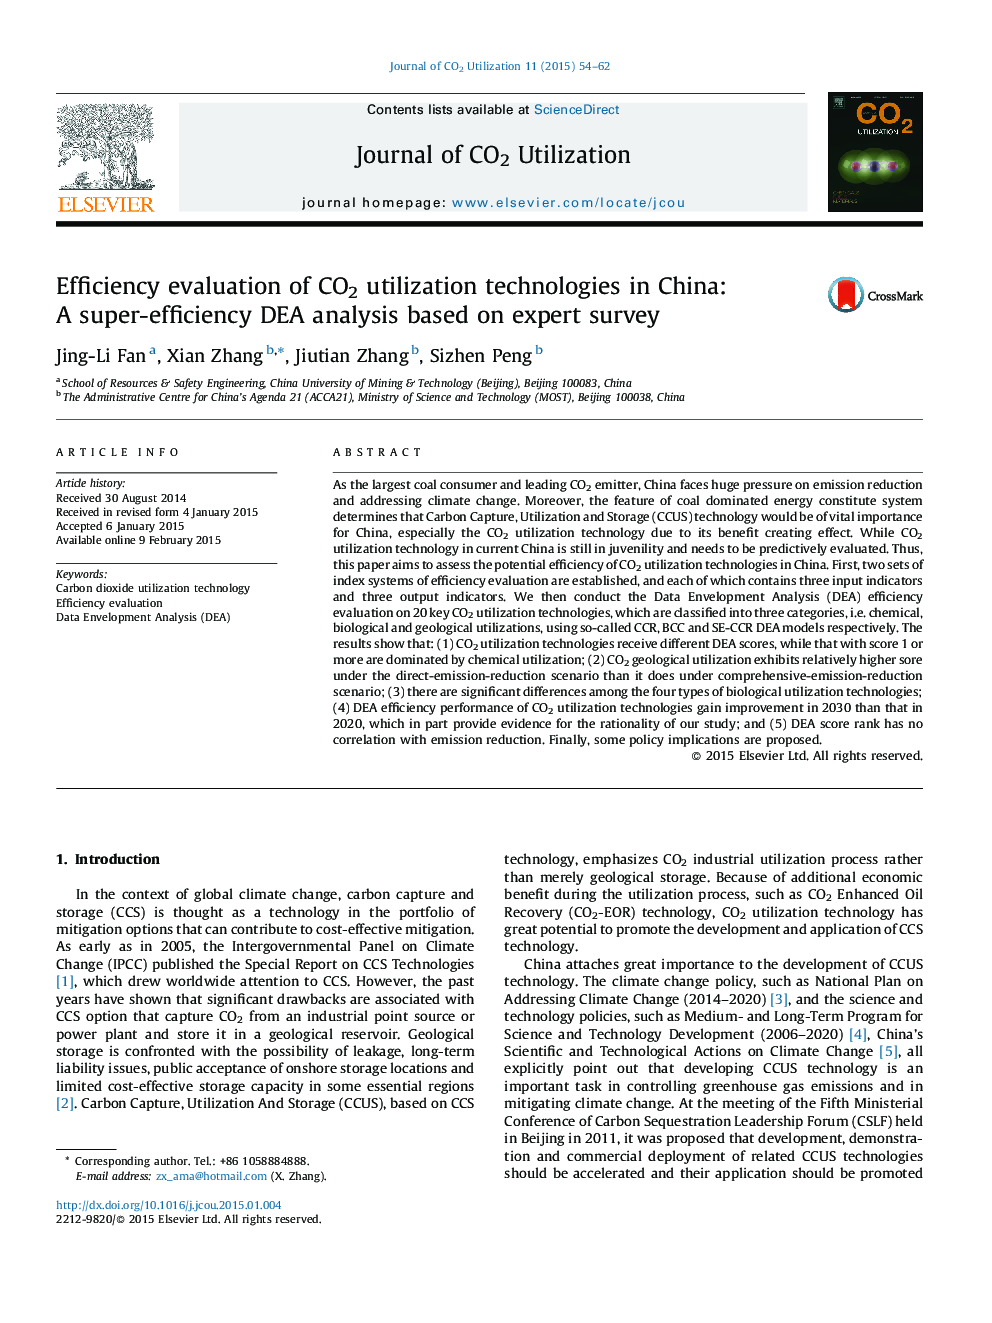 Efficiency evaluation of CO2 utilization technologies in China: A super-efficiency DEA analysis based on expert survey